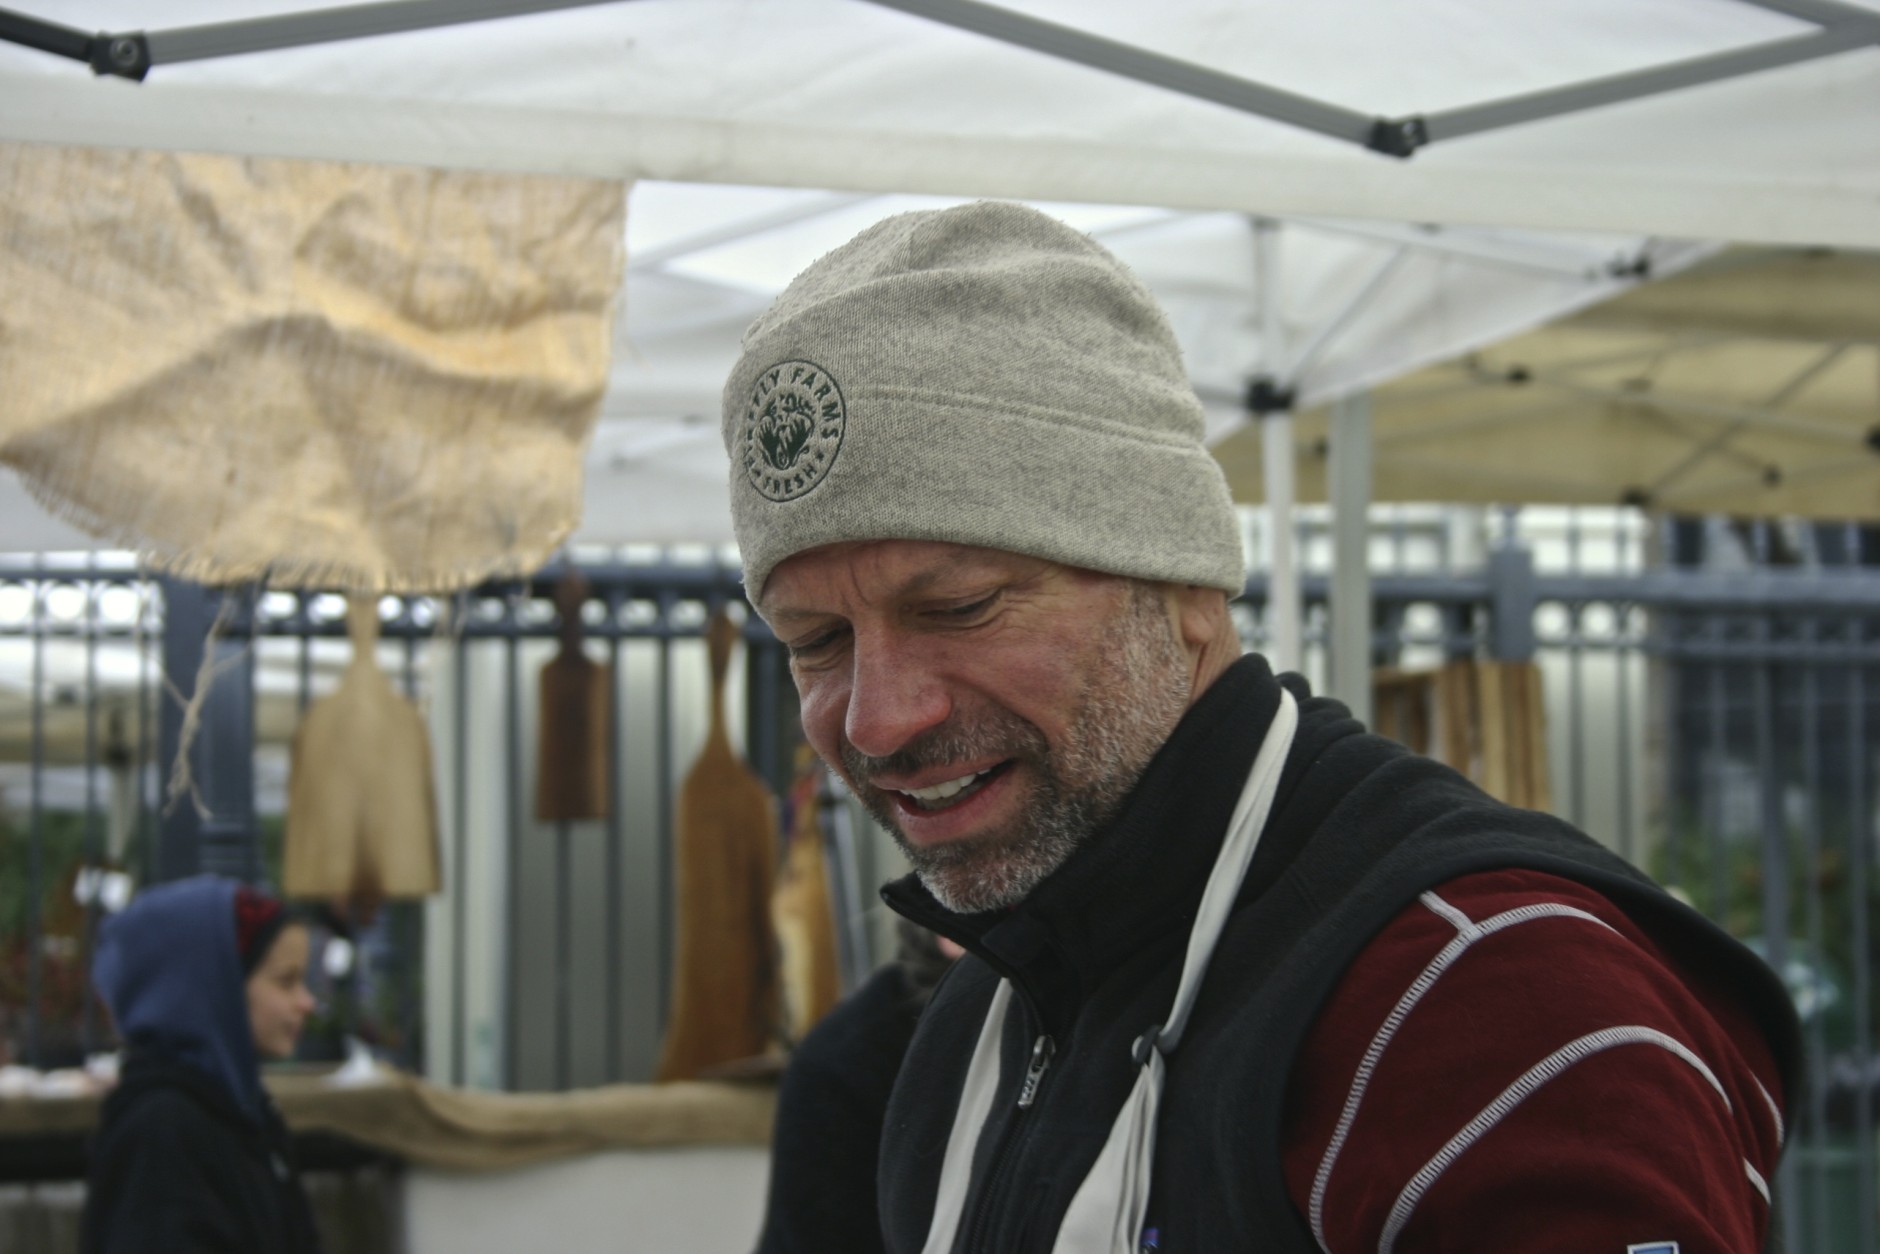 Mike Koch is now Executive Director of Fresh Farm Markets. The Dupont Circle farmer's market is year-round, so his Firefly Farms winter cap comes in handy.
 (WTOP/Kate Ryan)
